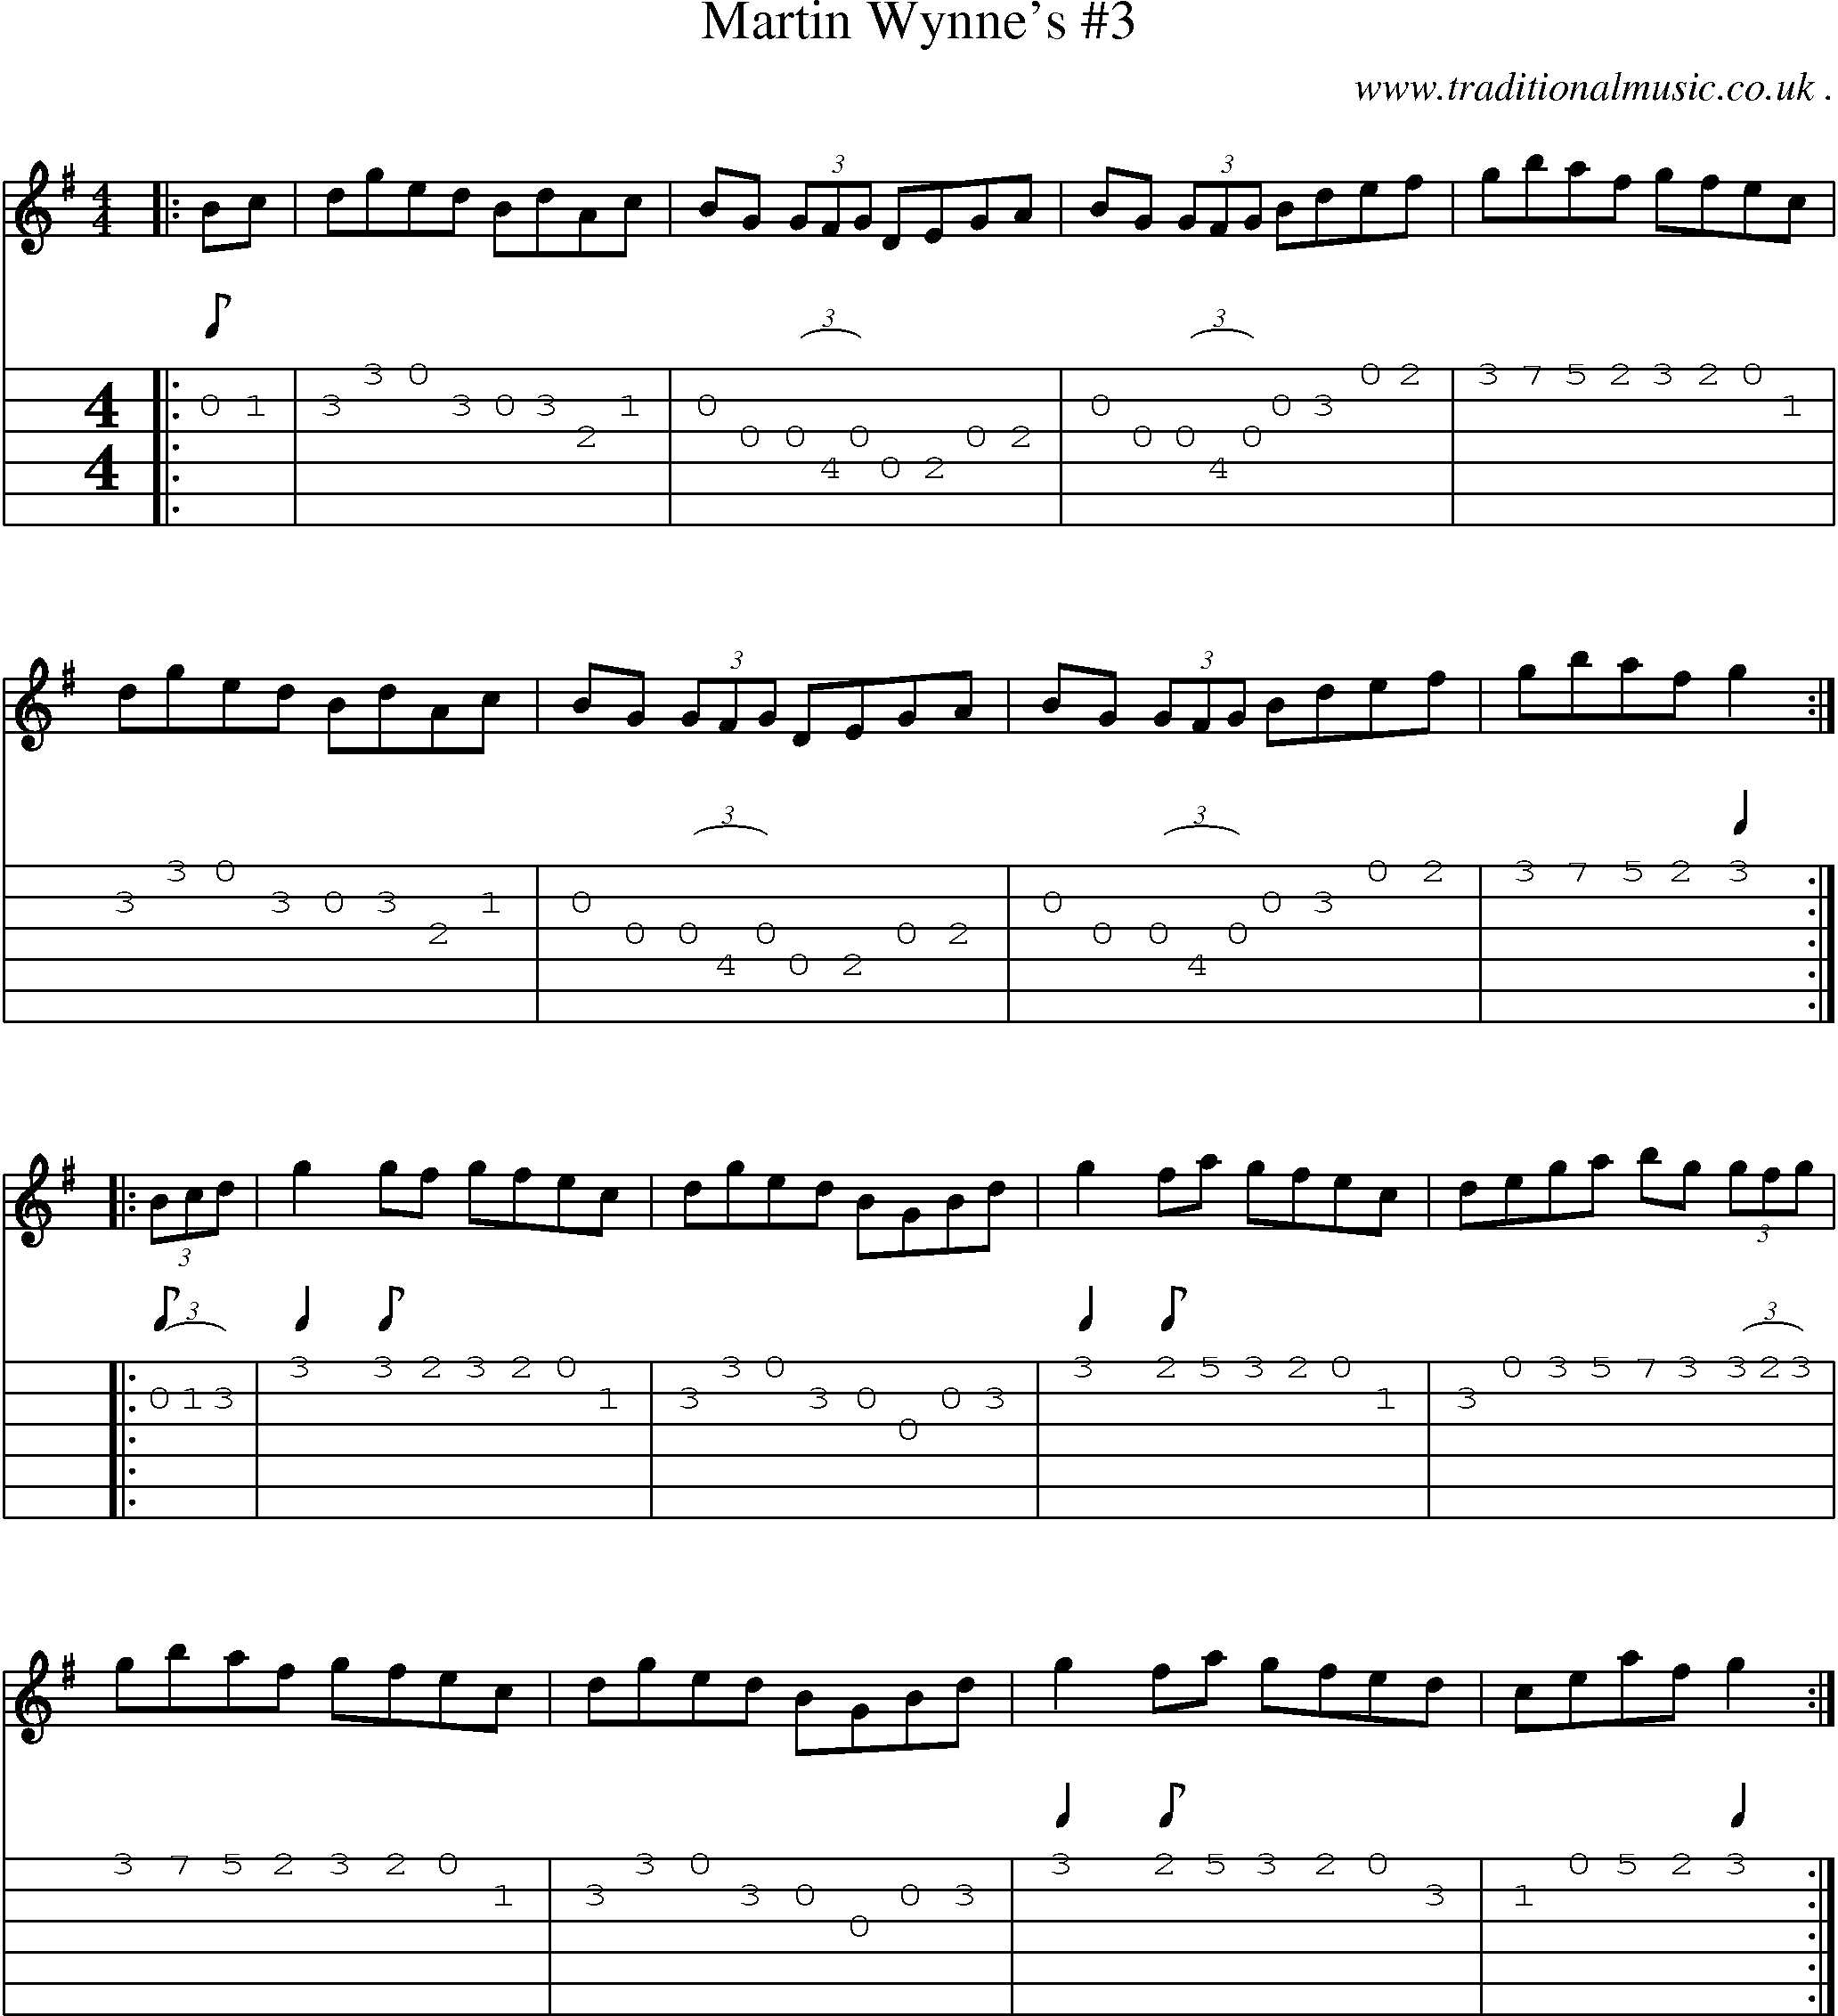 Sheet-Music and Guitar Tabs for Martin Wynnes 3